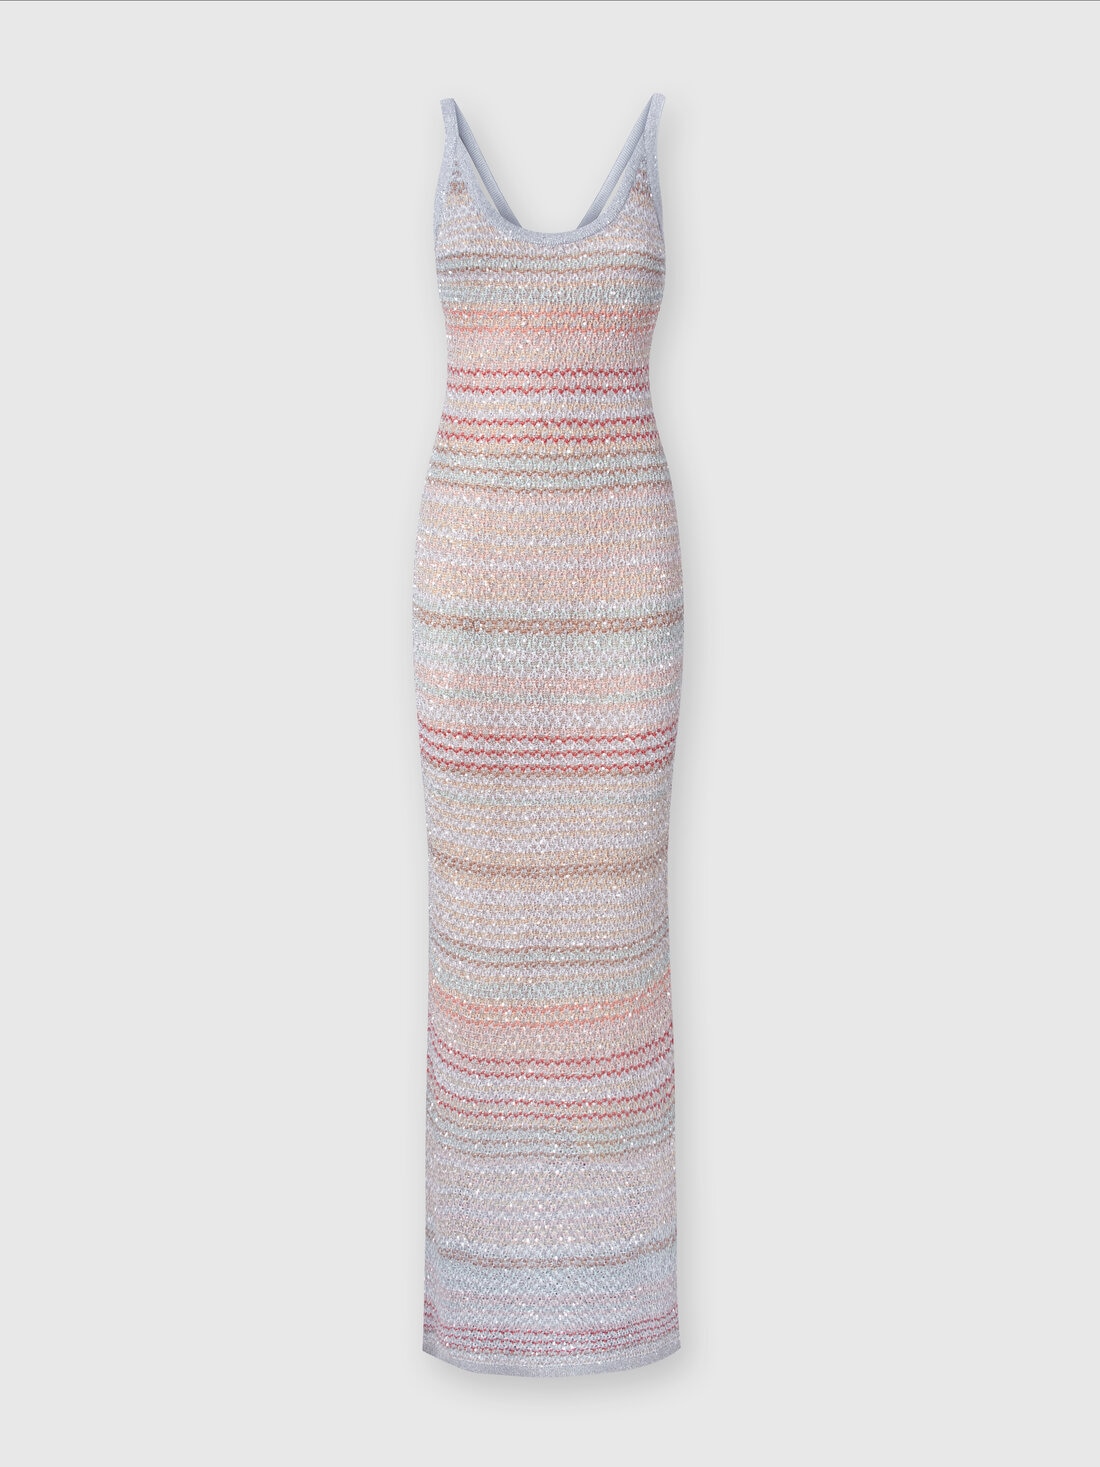 Long dress in zigzag knit with crochet-effect weave, Multicoloured  - DS24SG14BK033PSM9AI - 0